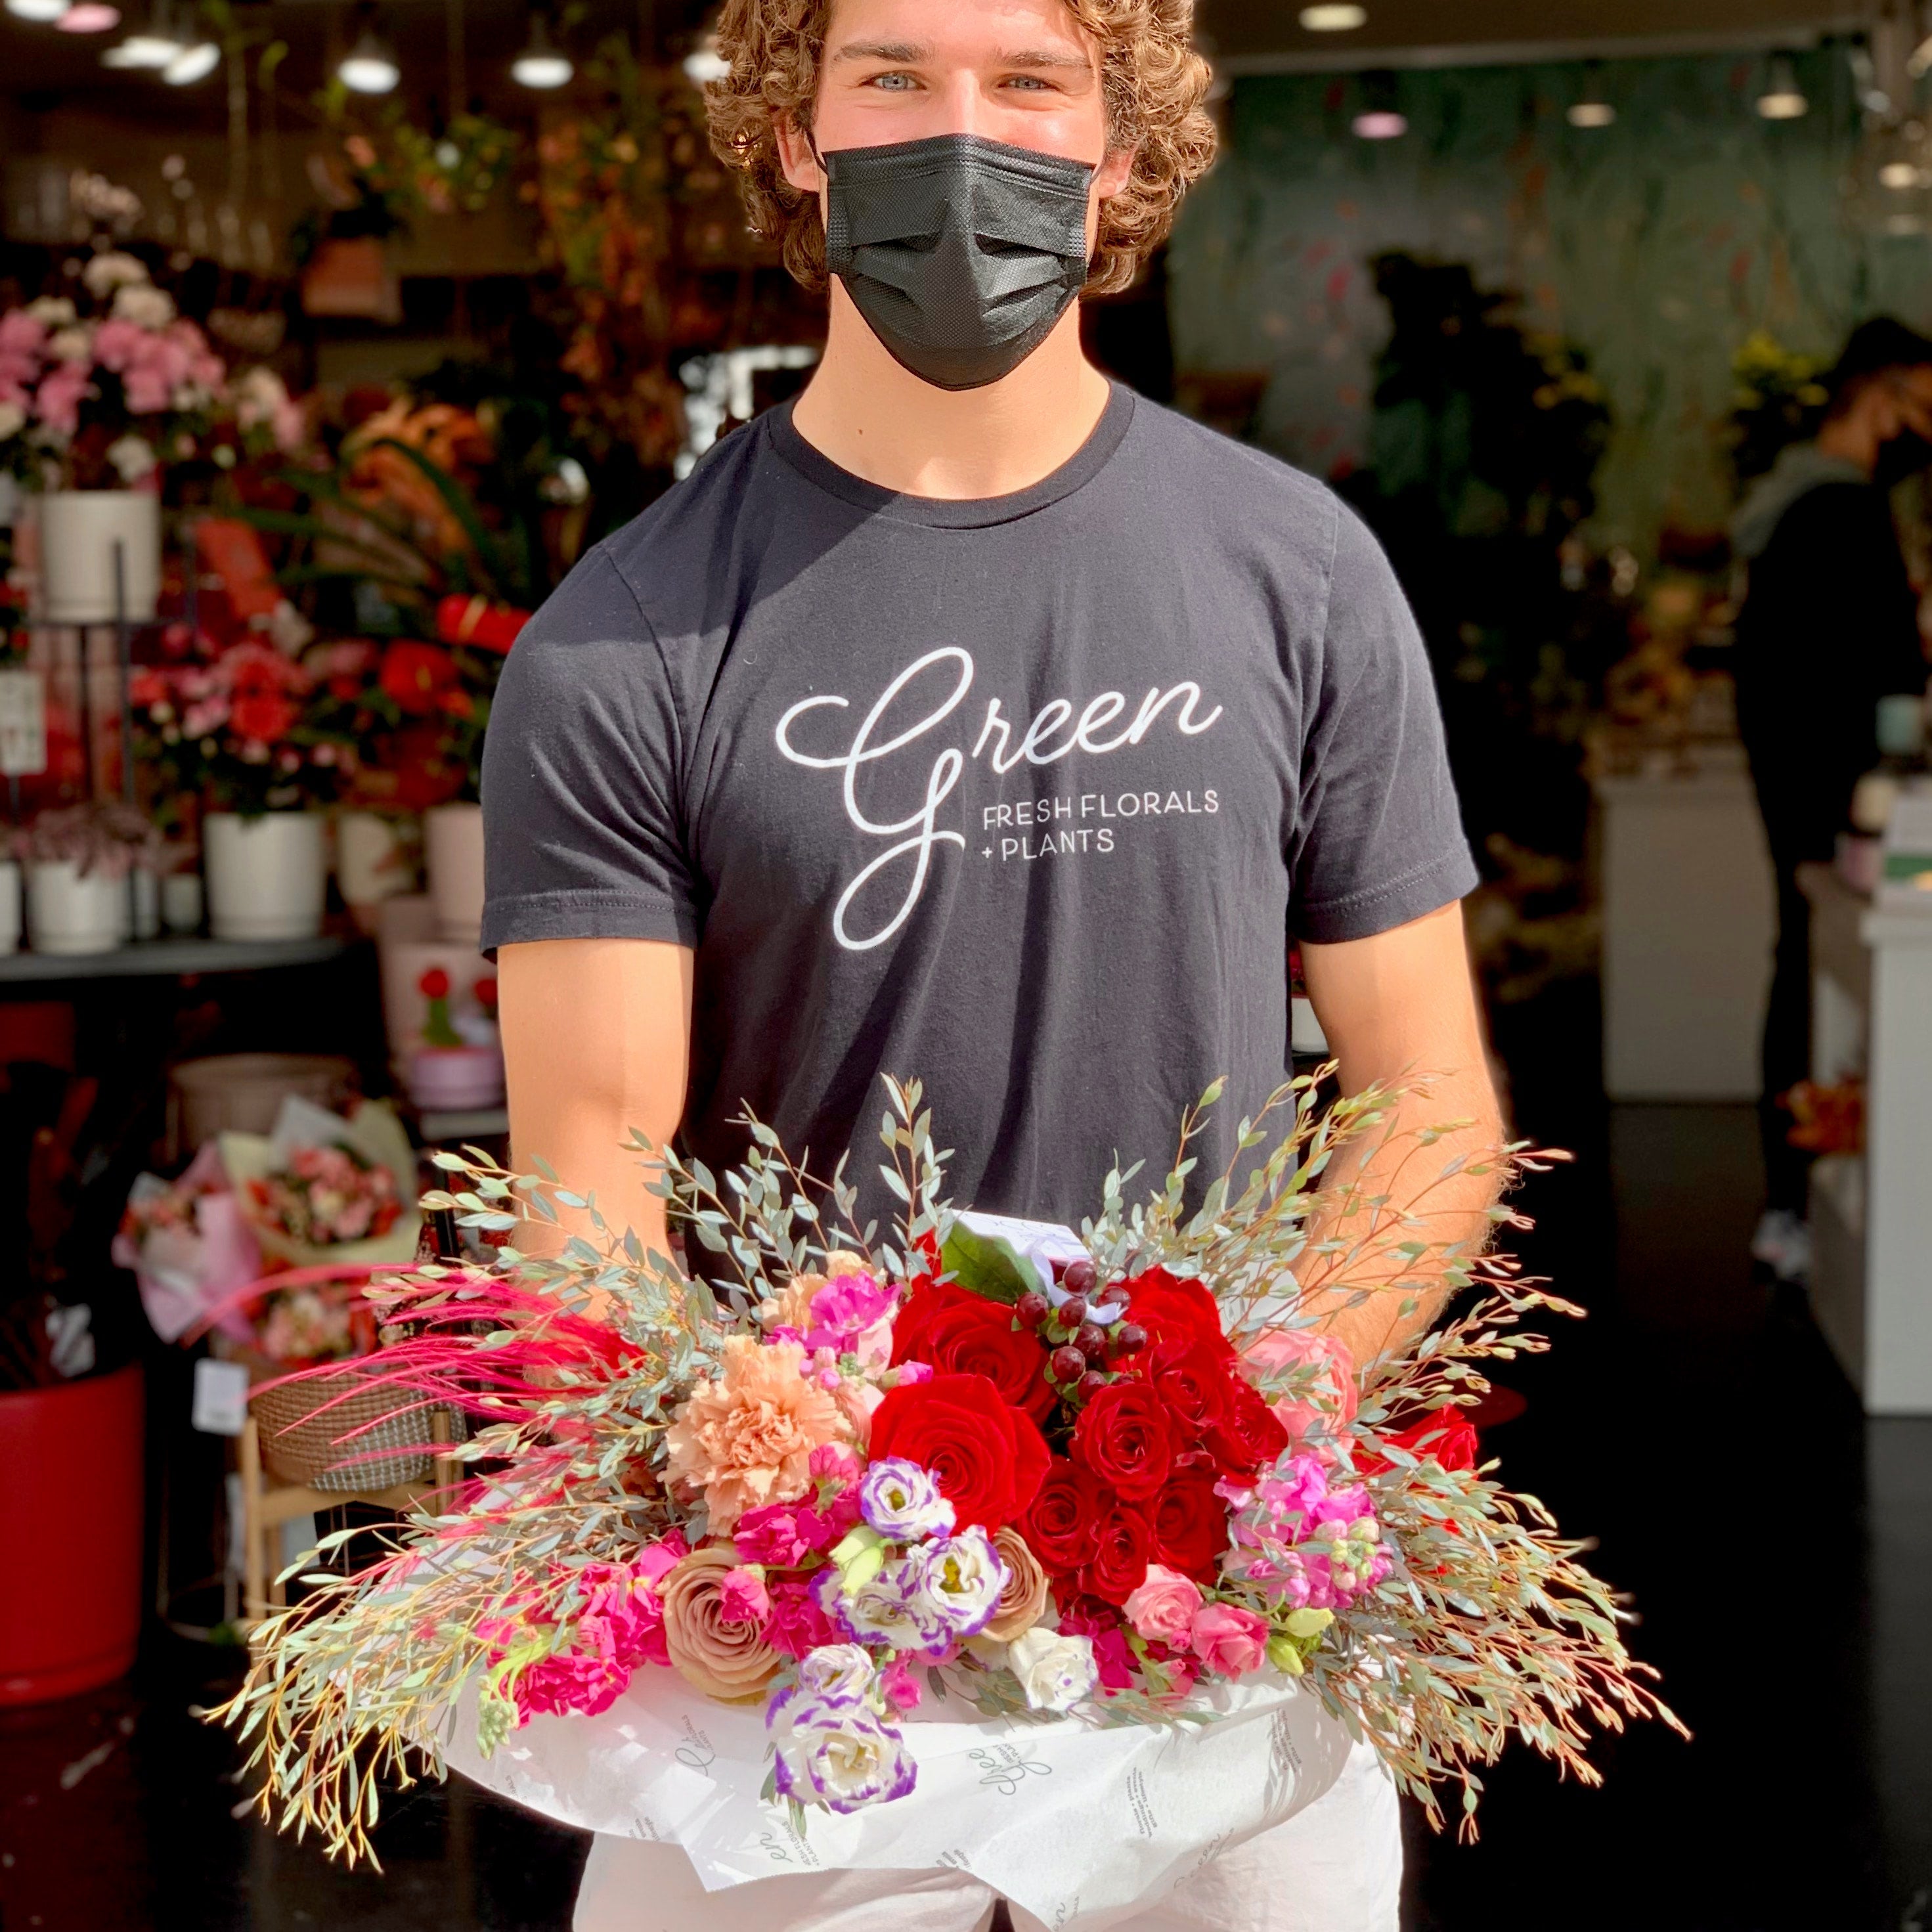 Handcrafted fresh to-order by Carlos Franco and the team of Green Fresh Florals + Plants. Learn more about us.